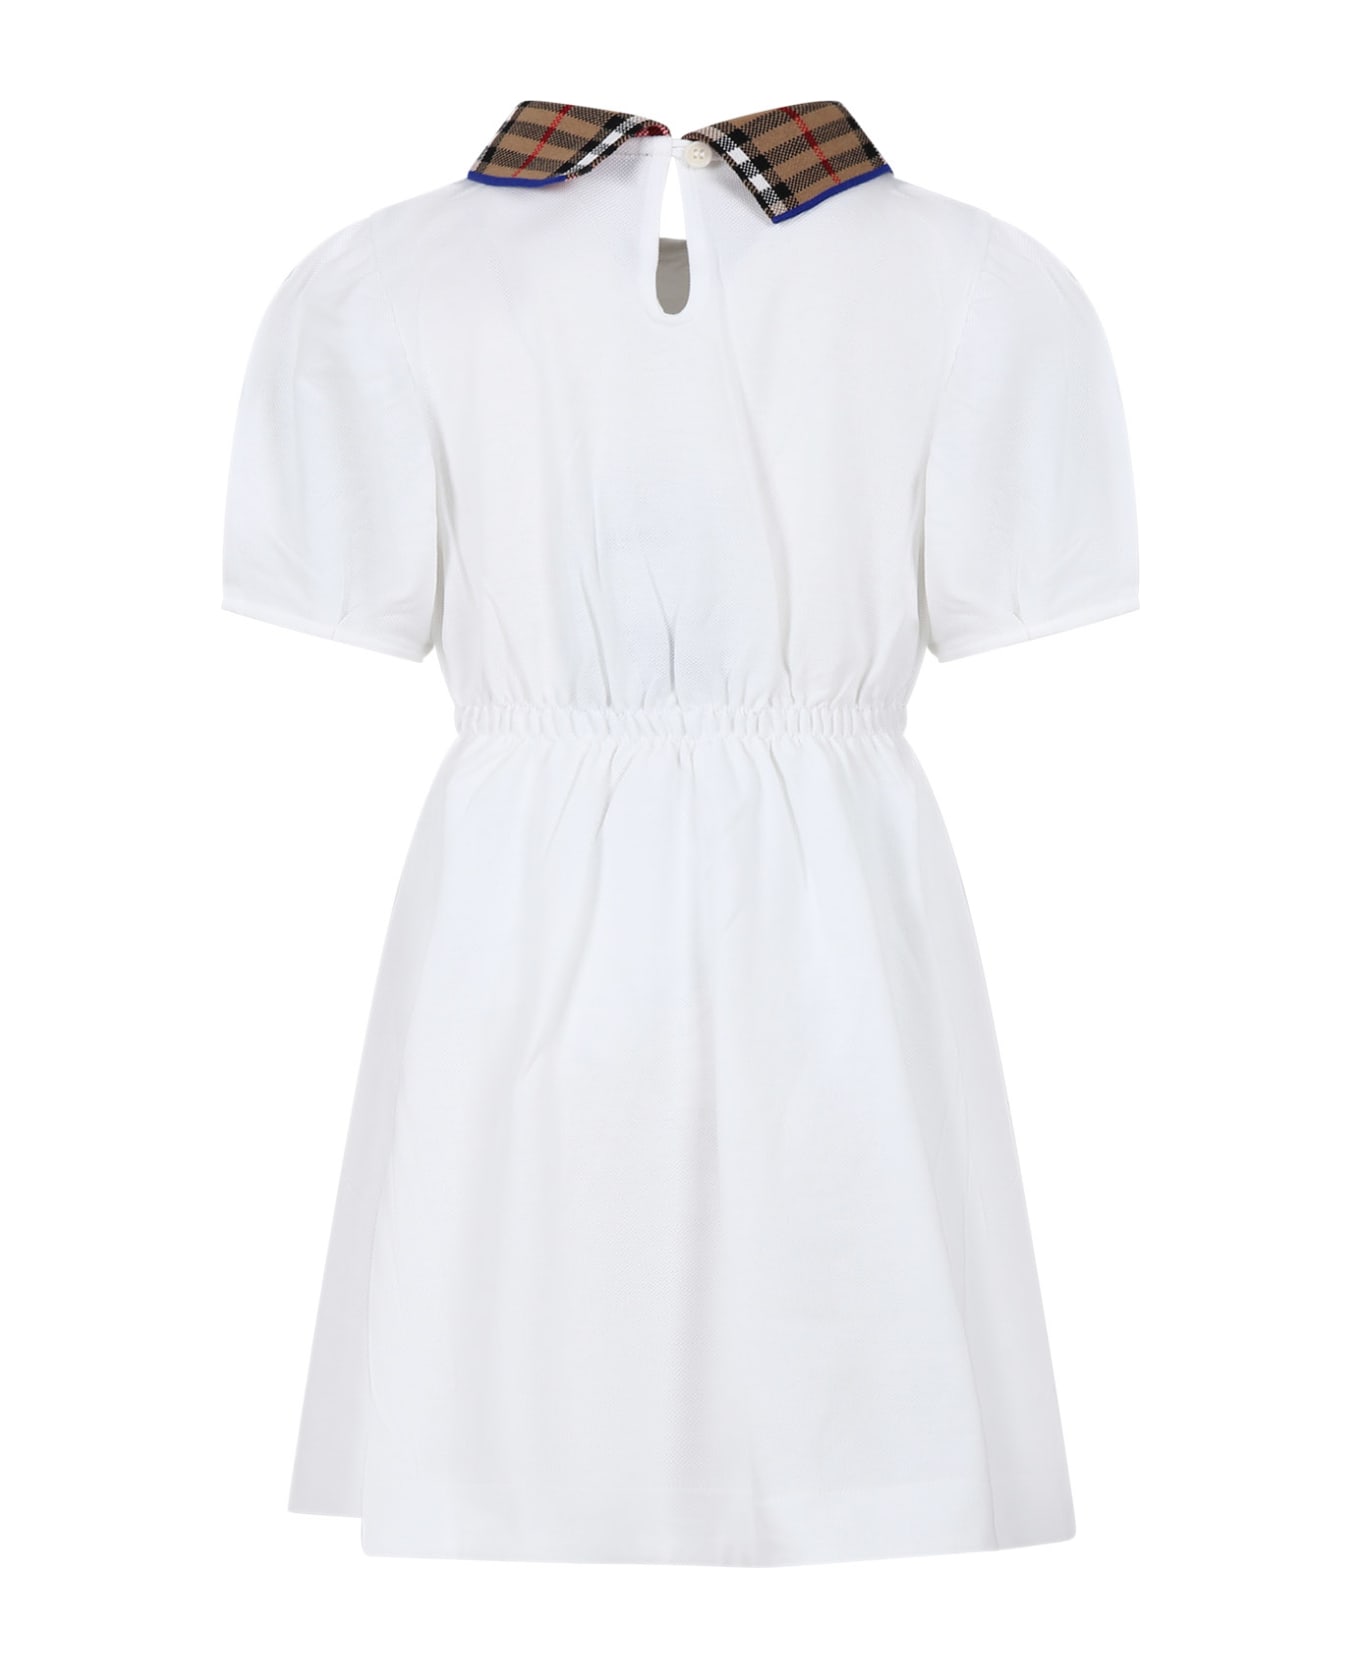 Burberry White Dress For Girl With Vintage Check On The Collar - White ワンピース＆ドレス